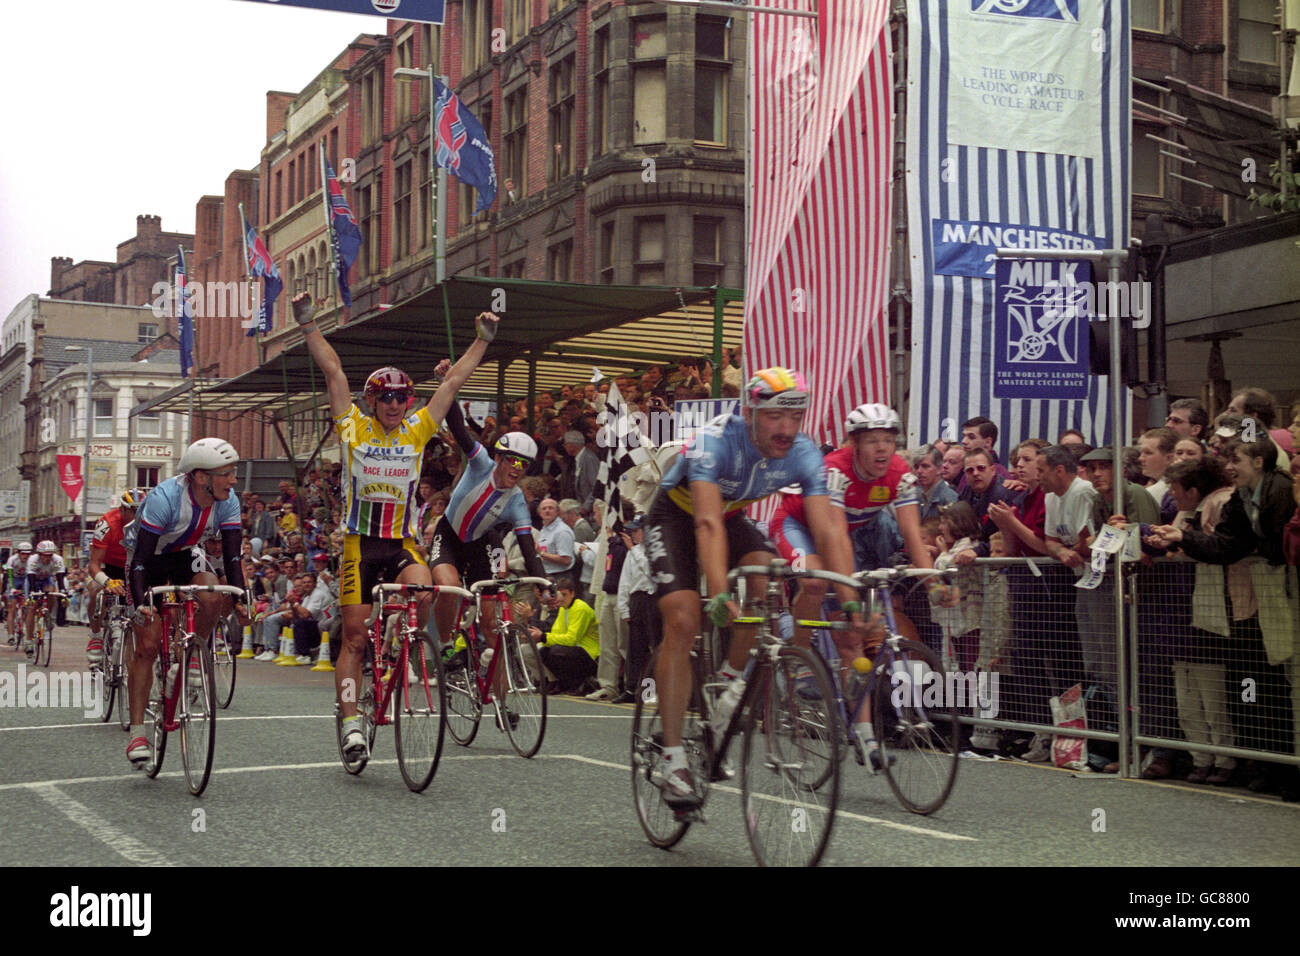 SAFELY HOME IN THE MIDDLE OF THE BUNCH TO GAIN A BRITISH VICTORY IN THE MILK RACE, CHRIS LILLYWHITE FROM WALTON ON THAMES SHOWS HIS DELIGHT AT BEING THE OVERALL WINNER OF THE TOUR OF BRITAIN CYCLE RACE WHICH FINISHED IN MANCHESTER. Stock Photo